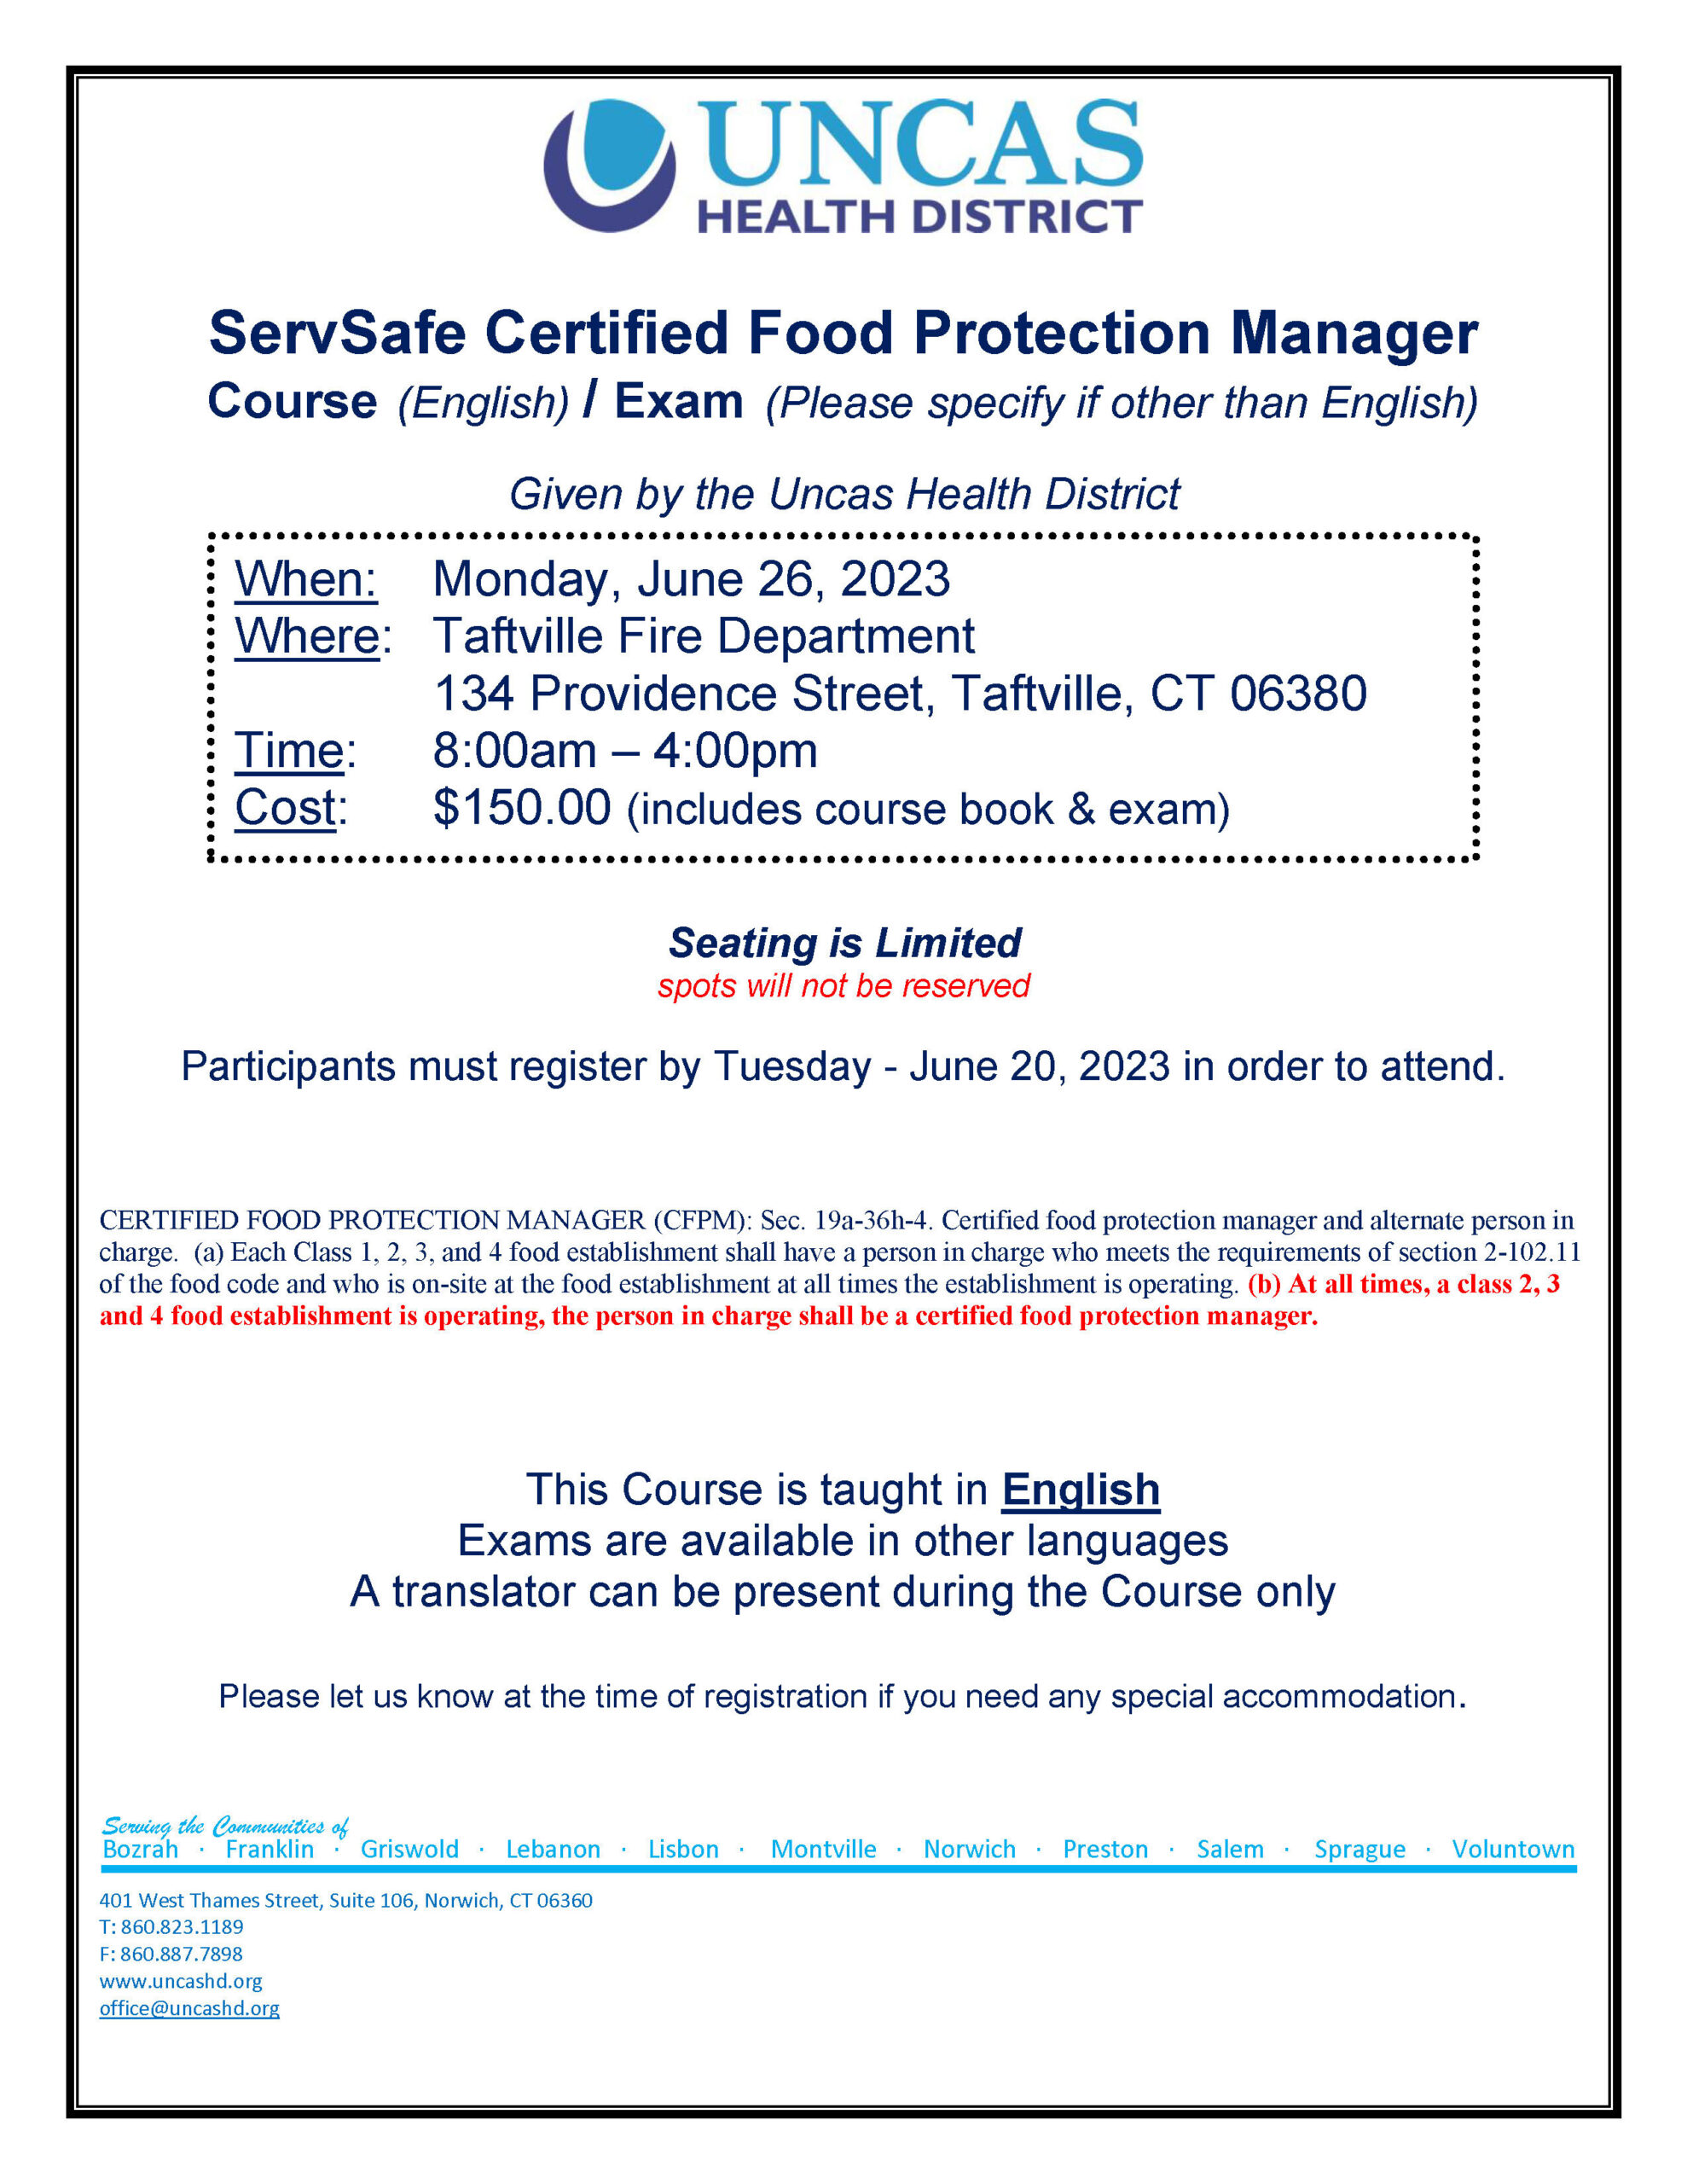 ServSafe Certified Food Protection Manager Course (English) / Exam (Please specify if other than English) Given by the Uncas Health District Seating is Limited spots will not be reserved Participants must register by Tuesday - June 20, 2023 in order to attend. CERTIFIED FOOD PROTECTION MANAGER (CFPM): Sec. 19a-36h-4. Certified food protection manager and alternate person in charge. (a) Each Class 1, 2, 3, and 4 food establishment shall have a person in charge who meets the requirements of section 2-102.11 of the food code and who is on-site at the food establishment at all times the establishment is operating. (b) At all times, a class 2, 3 and 4 food establishment is operating, the person in charge shall be a certified food protection manager. This Course is taught in English Exams are available in other languages A translator can be present during the Course only Please let us know at the time of registration if you need any special accommodation.